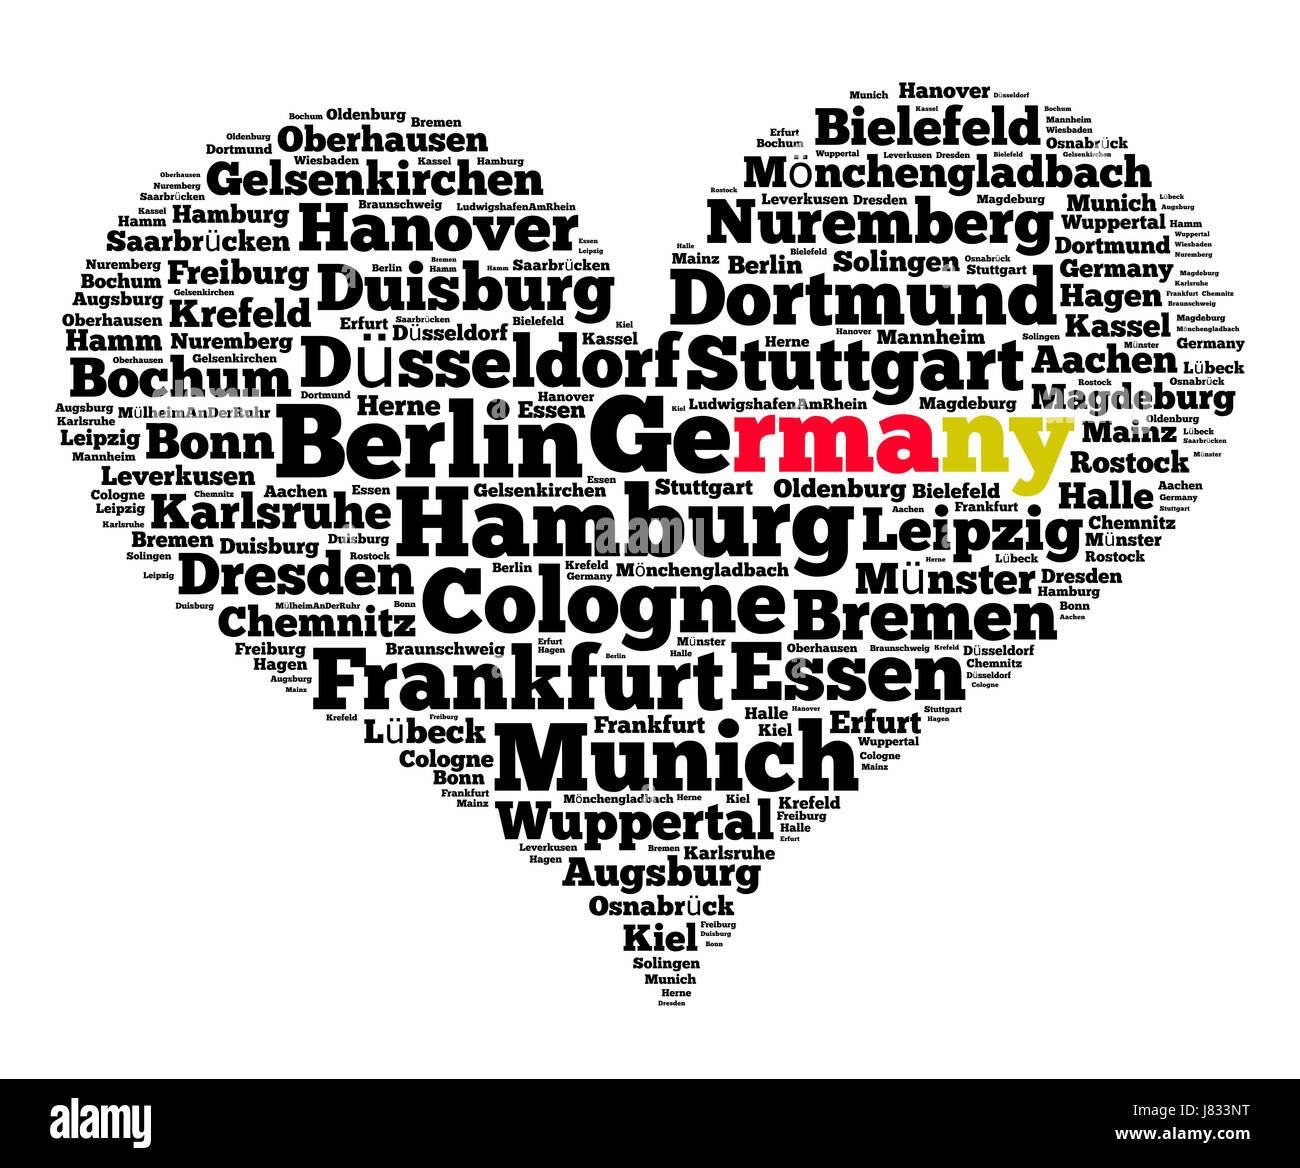 Localities in Germany word cloud concept Stock Photo